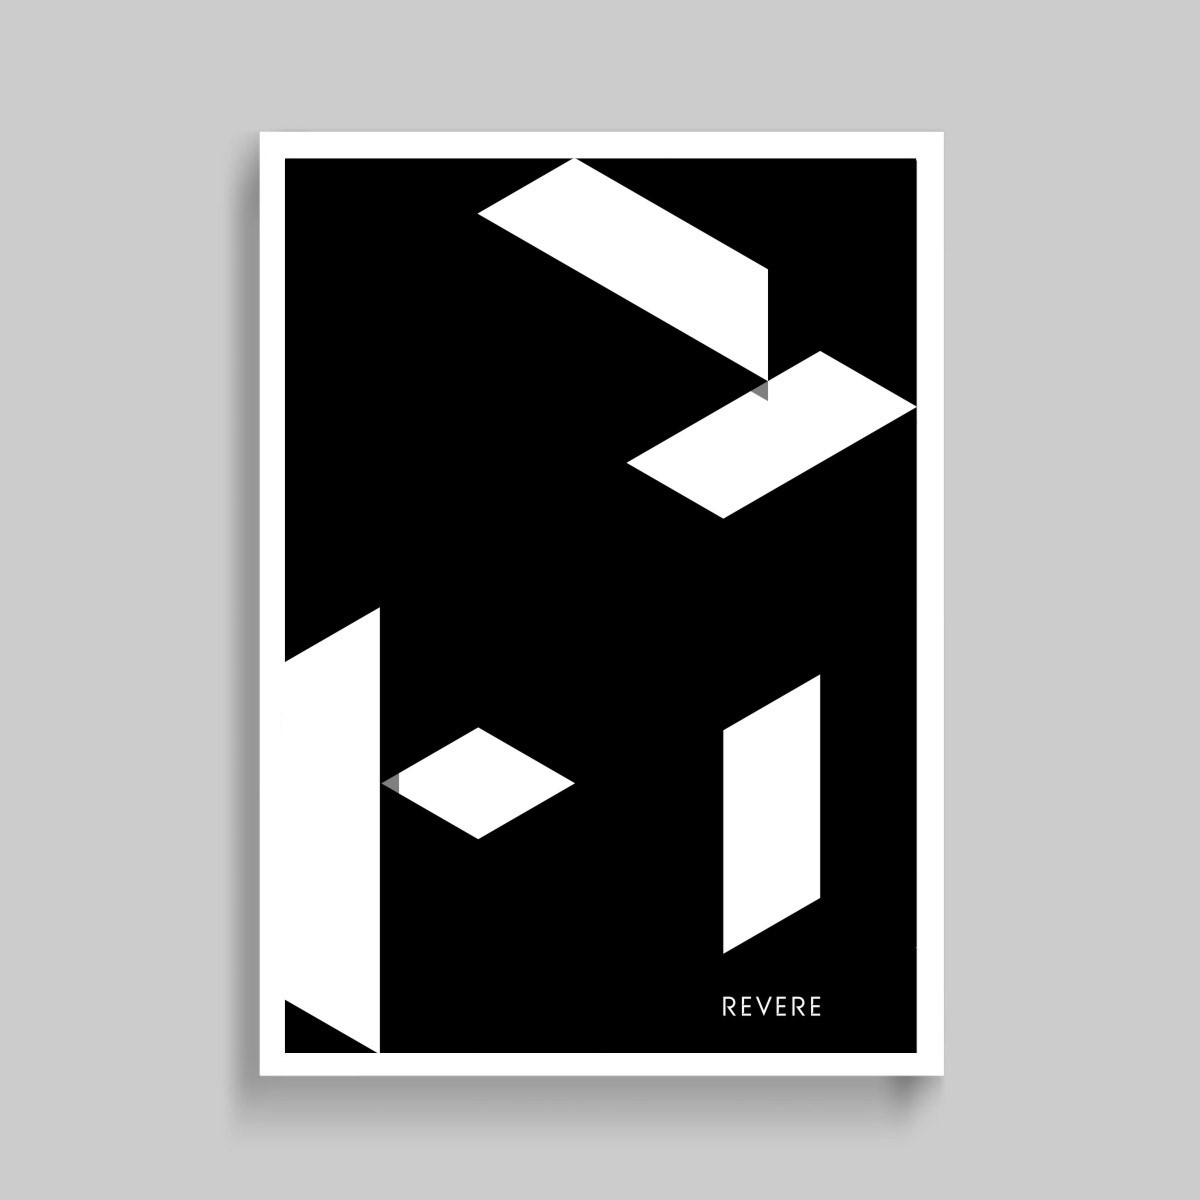 Revere. Geometric shard poster mock-up. Brand identity design by Superfried. Manchester.